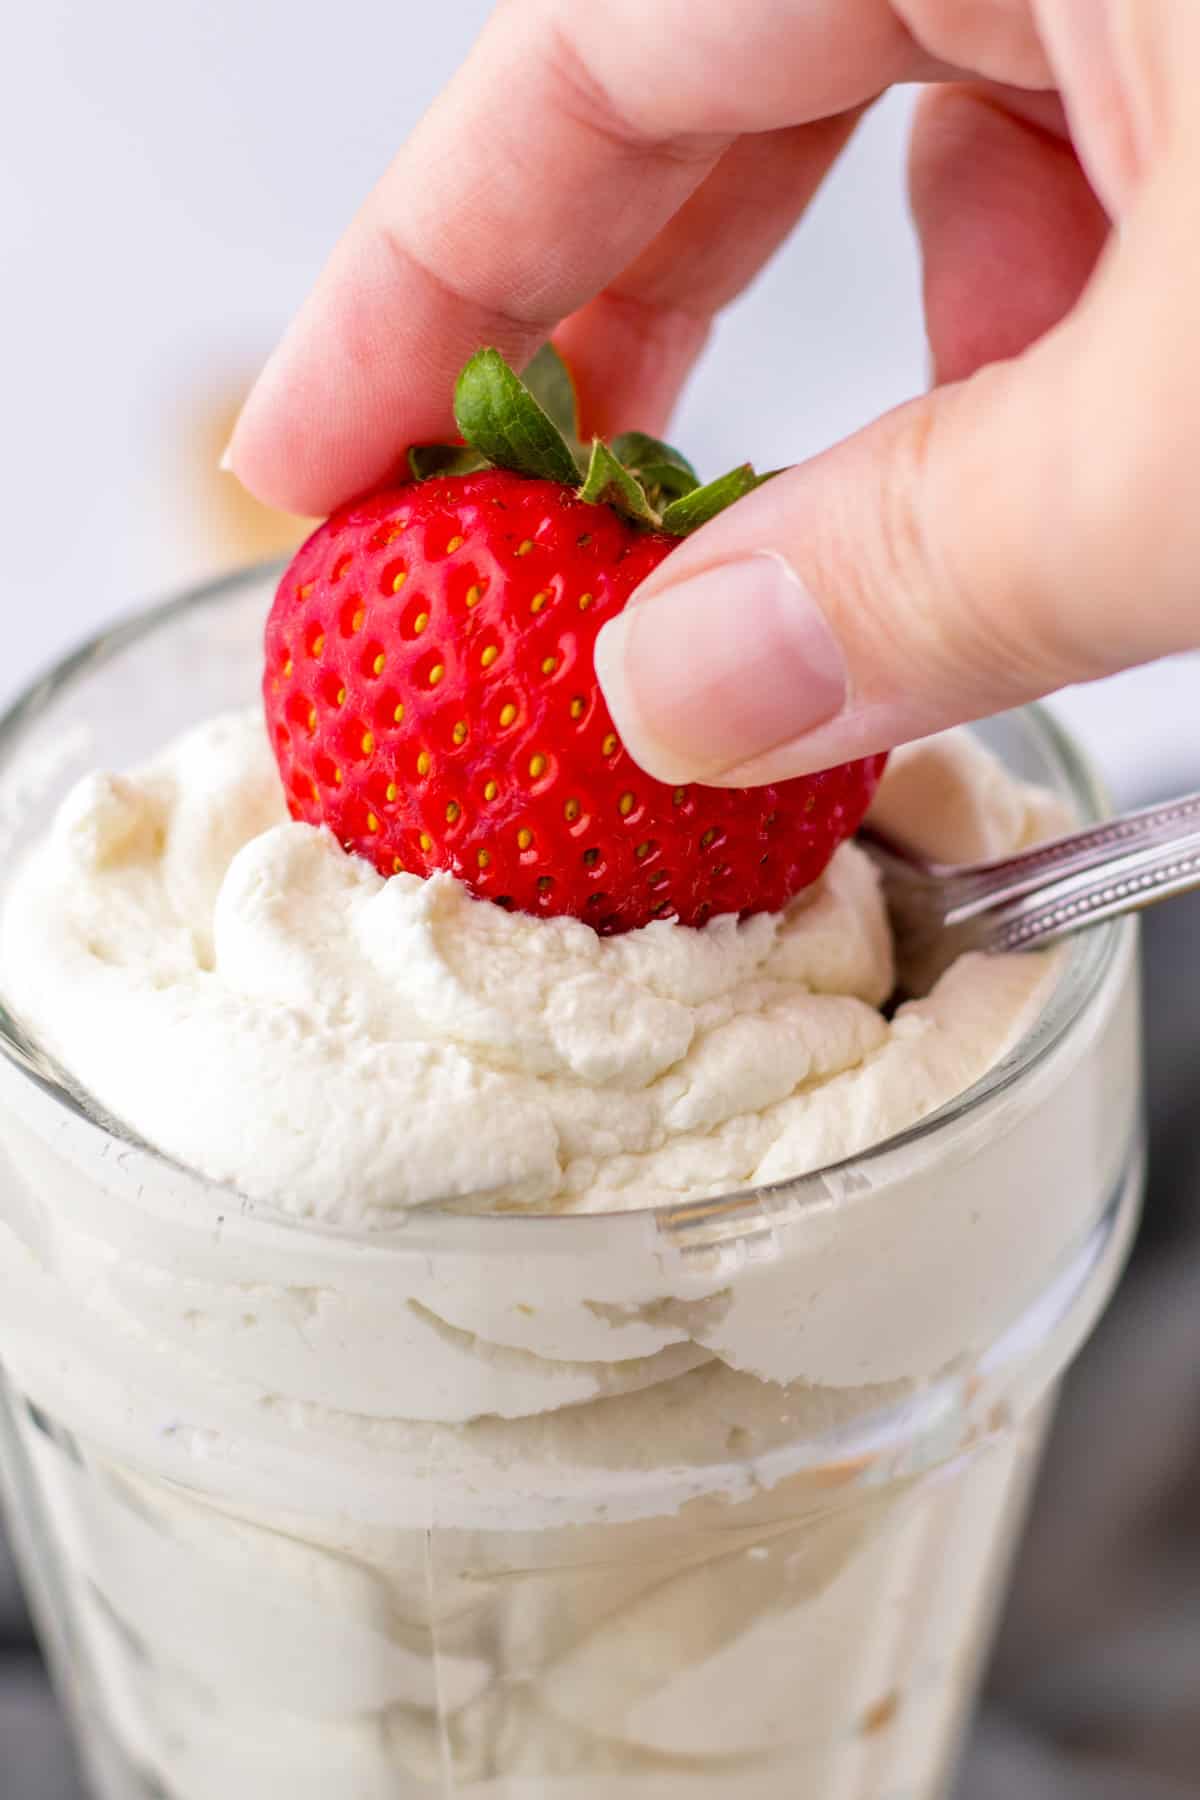 A fresh strawberry being dipping into homemade cool whip.